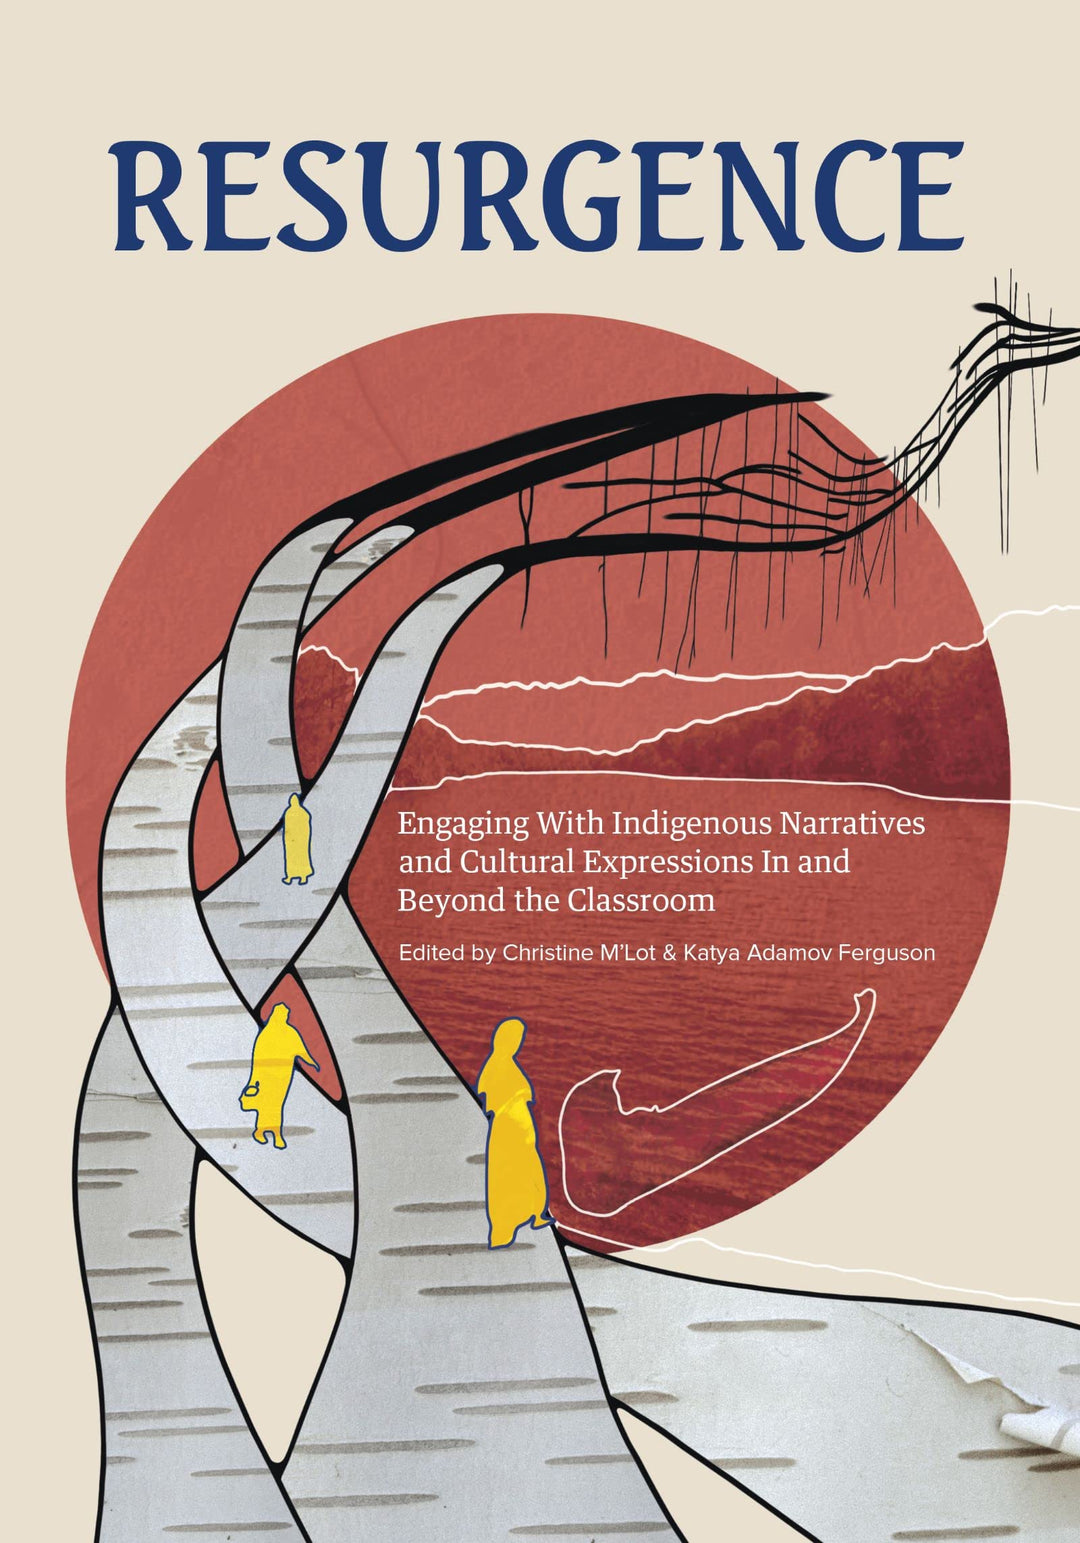 Resurgence: Engaging With Indigenous Narratives and Cultural Expressions In and Beyond the Classroom edited by Christine M'Lot & Katya Adamov Ferguson